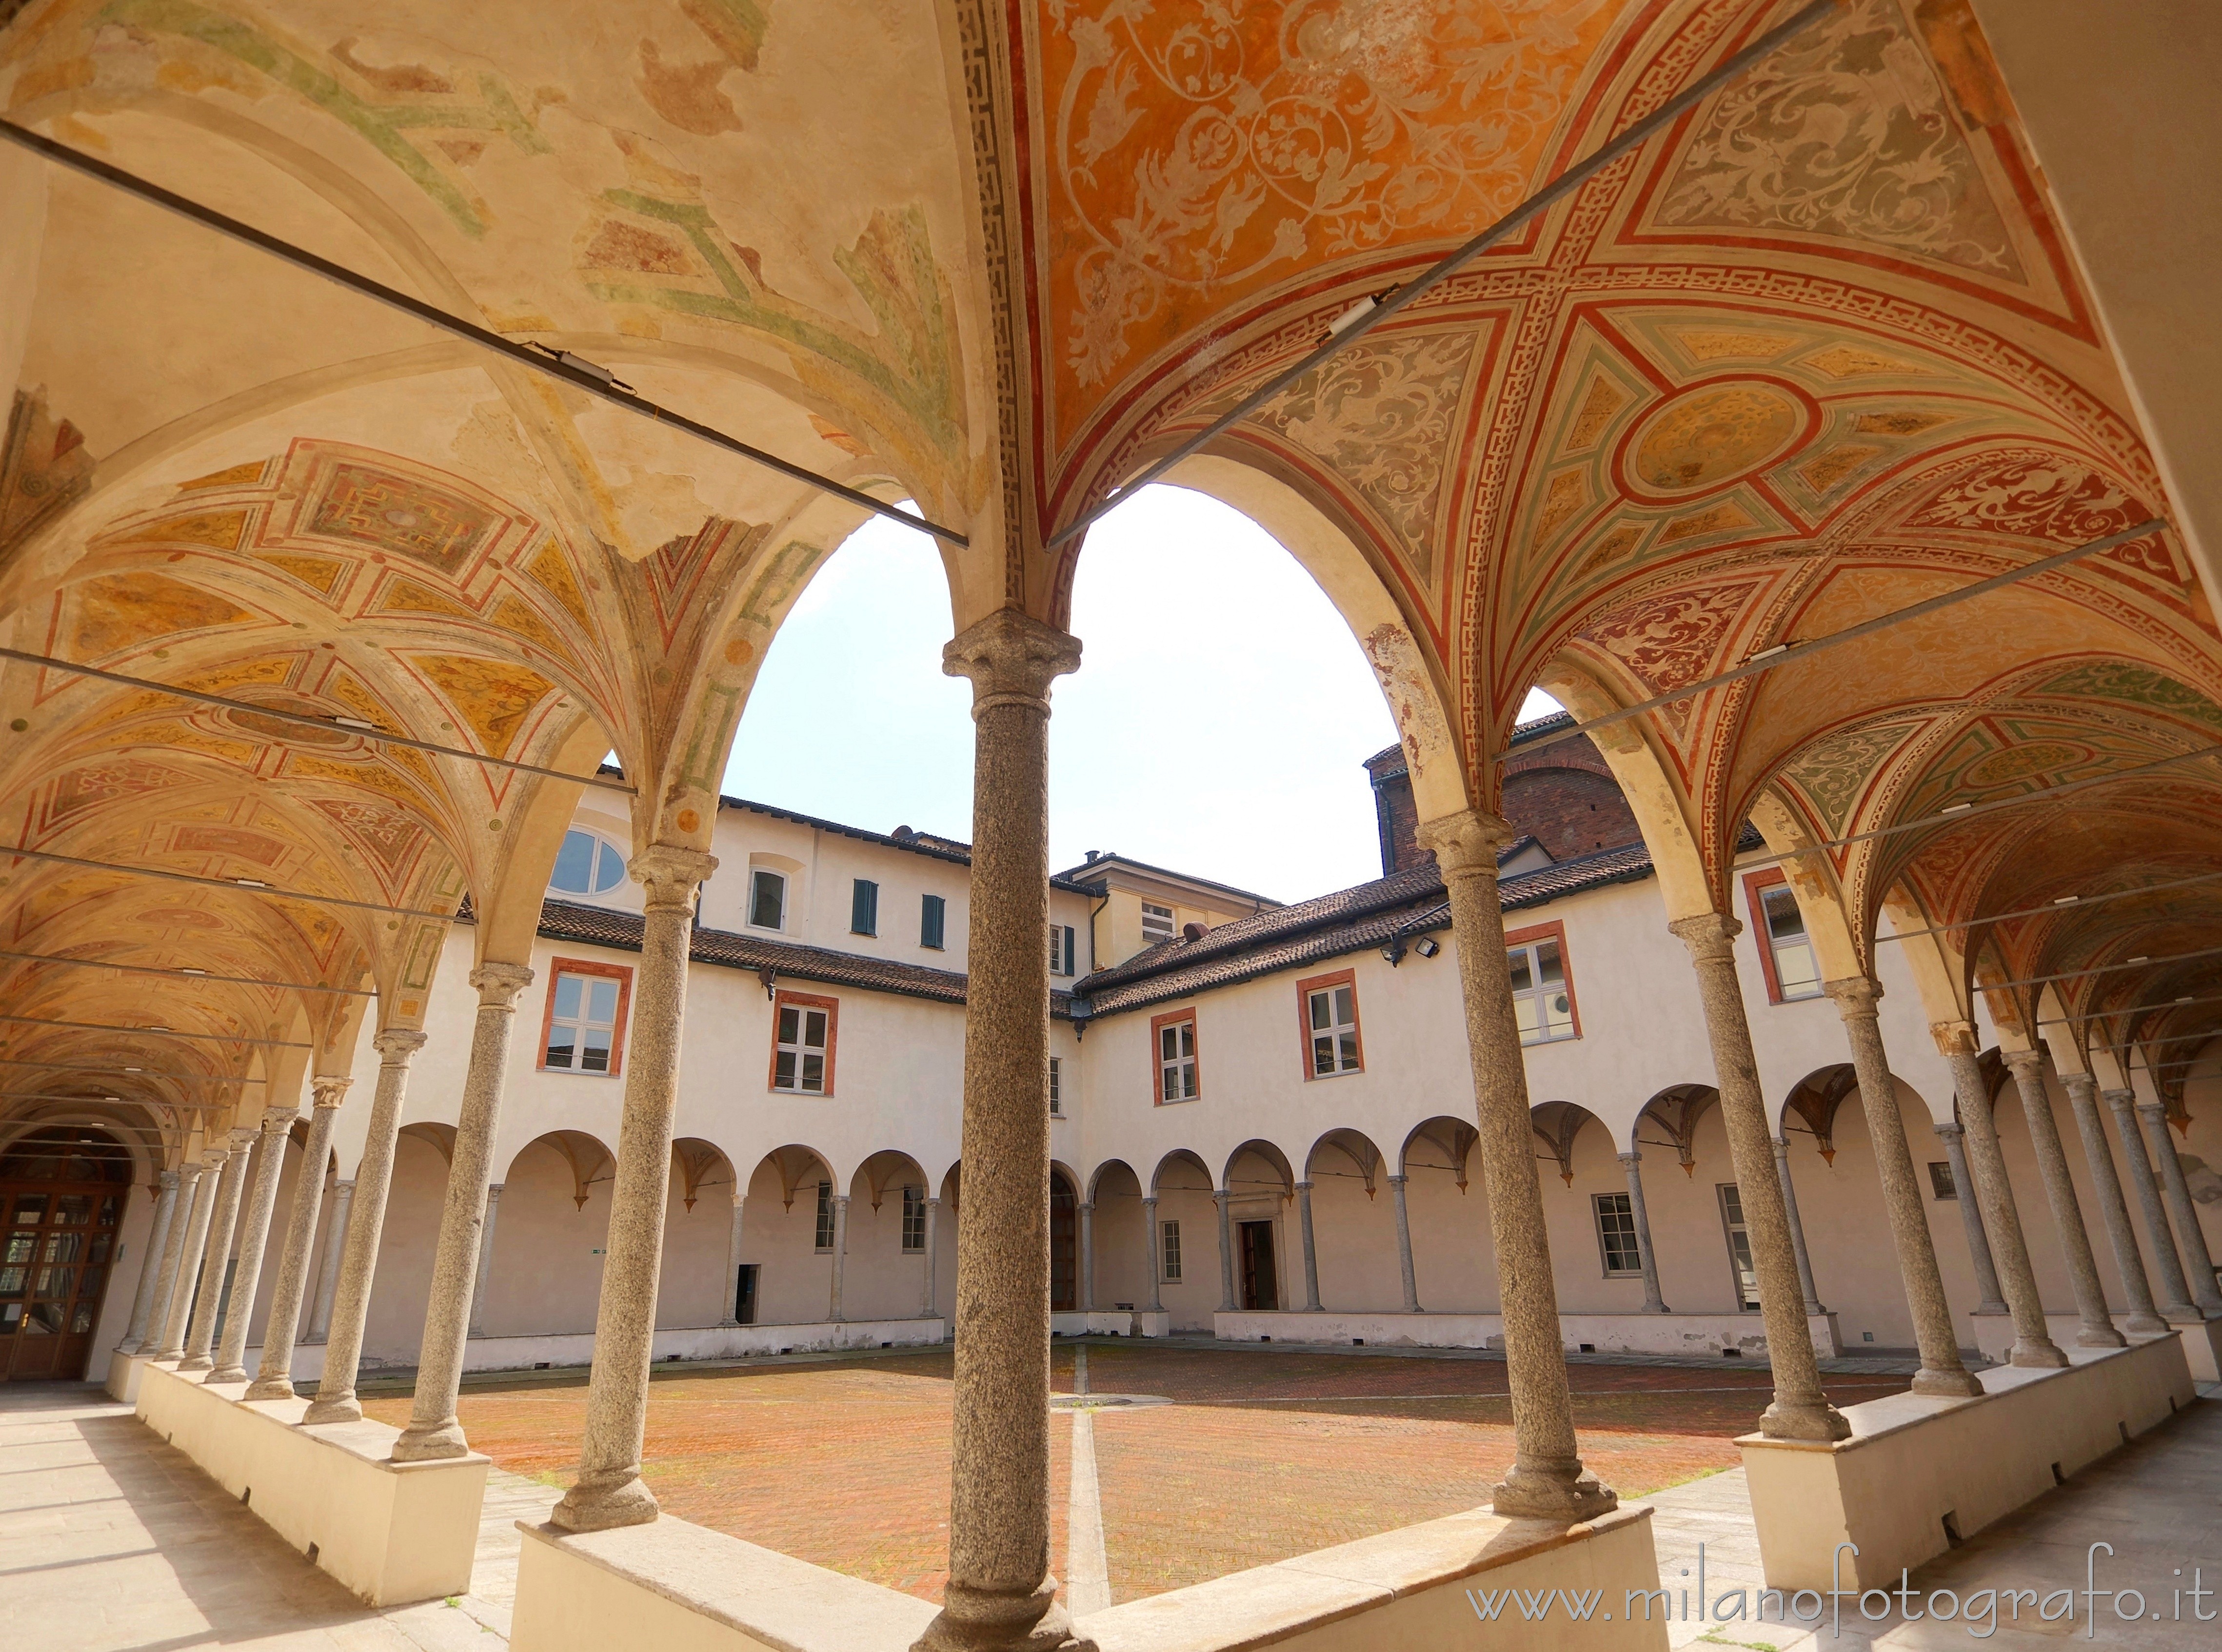 Milan (Italy): Small cloister of the Cloisters of San Simpliciano - Milan (Italy)